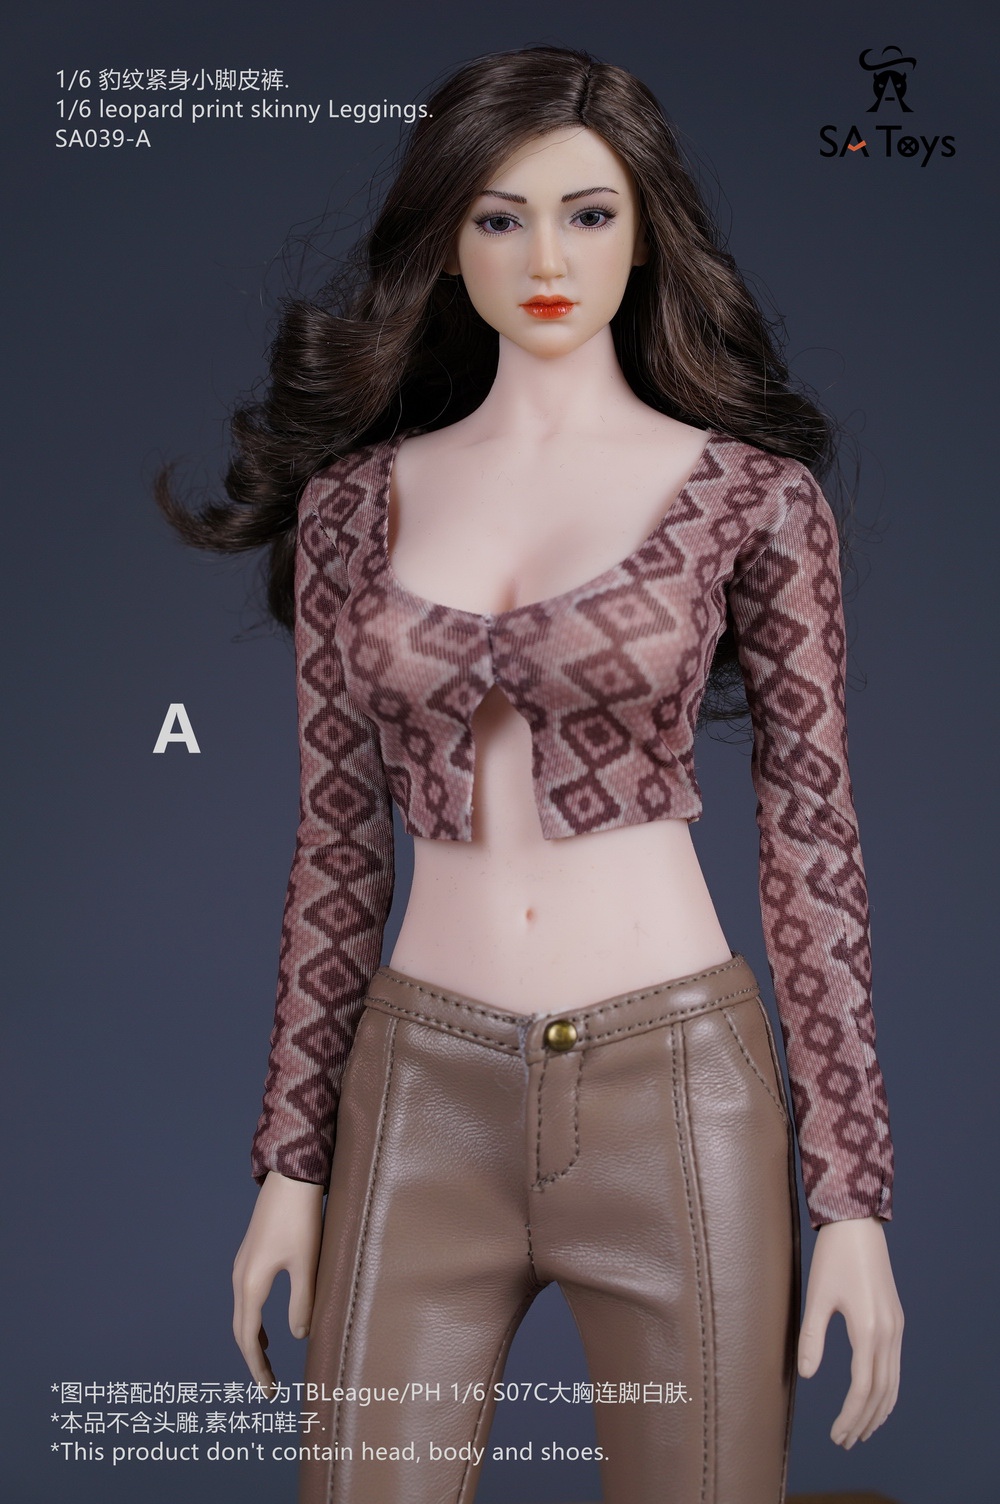 NEW PRODUCT: SA Toys: 1/6 Lantern Sleeve Leather Pants, Leopard Printed Leather Pants, Printed Backless Dresses (Multiple Options) 10584812